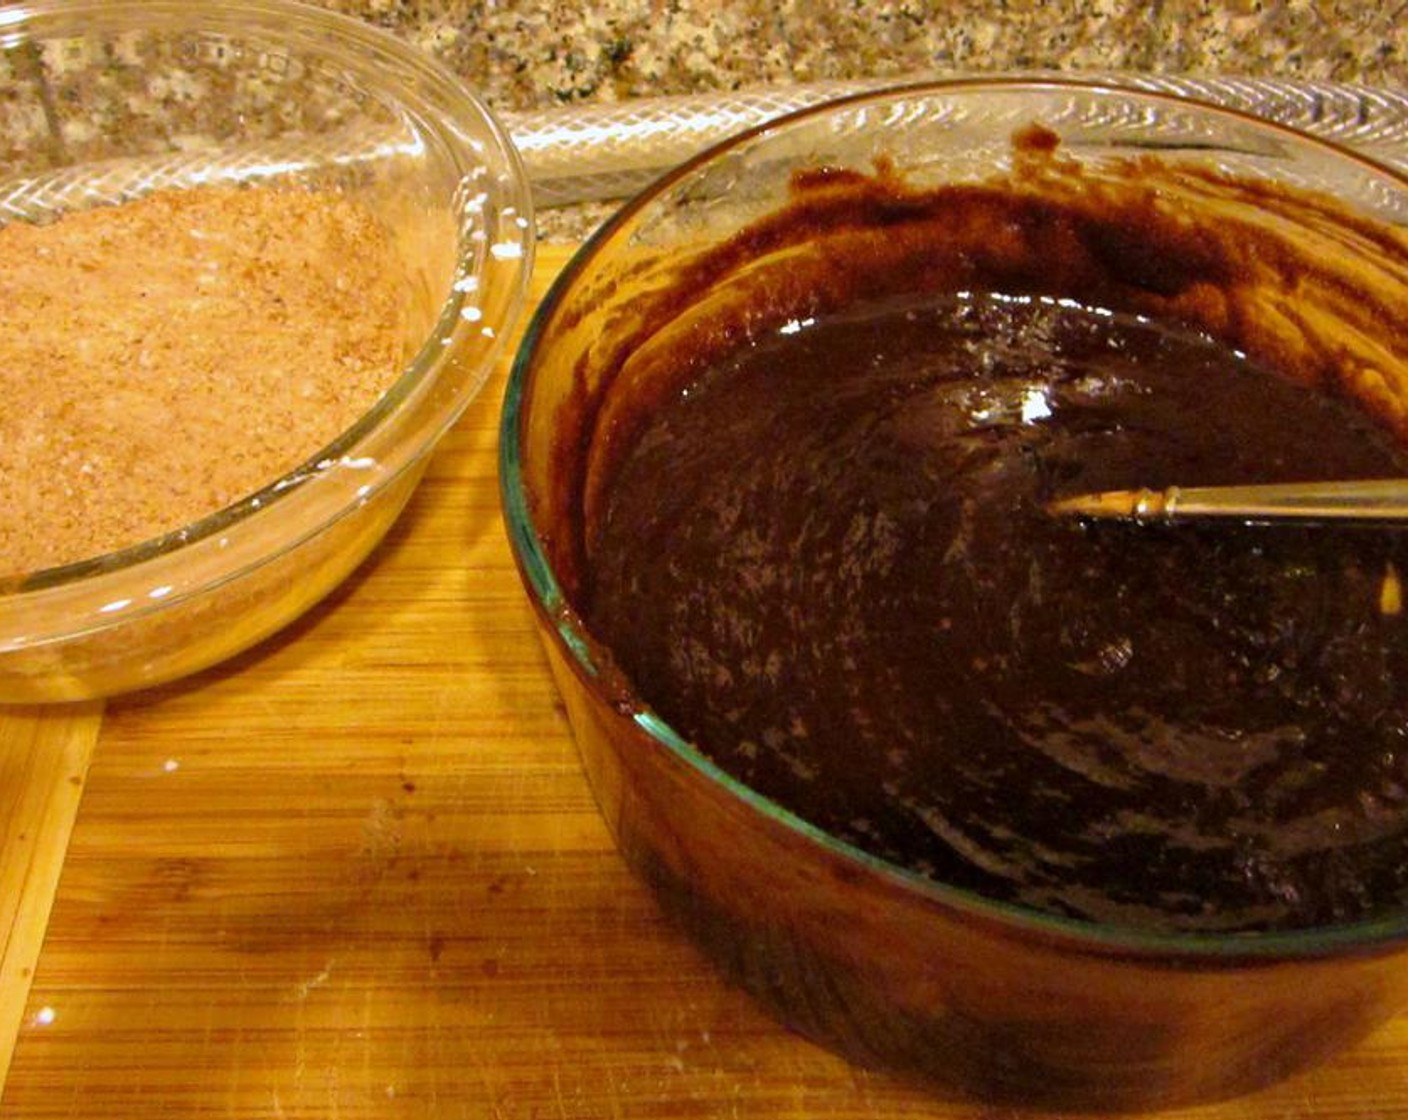 step 2 Whisk together Corn Starch (1/3 cup), Unsweetened Cocoa Powder (1/4 cup), Ground Cinnamon (1 tsp) and Salt (1/2 tsp) in a smaller mixing bowl and set aside.